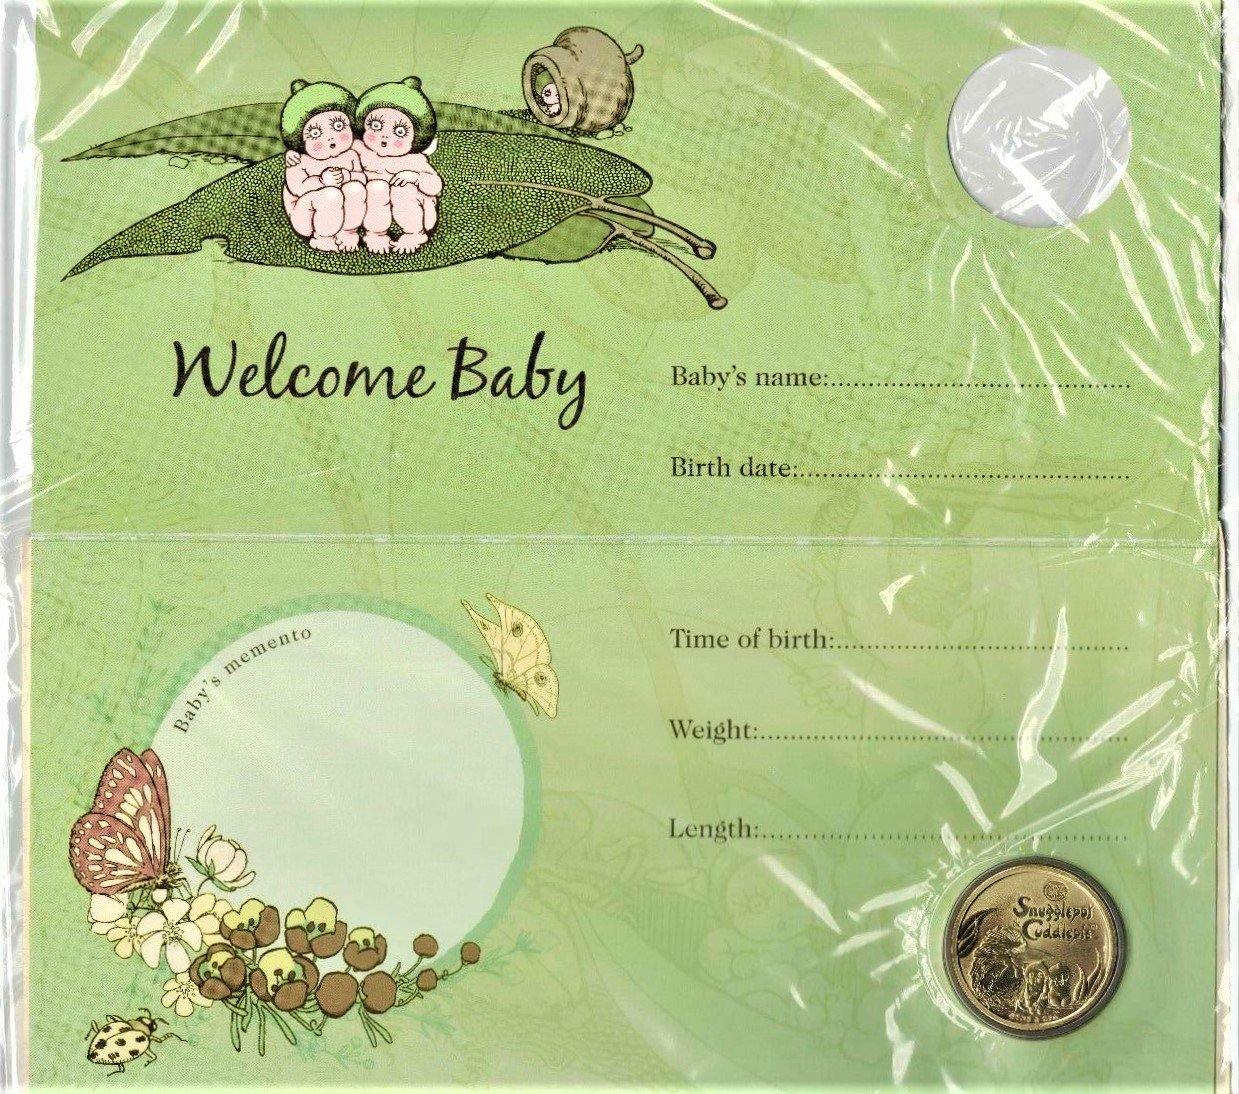 2015 PNC - Snugglepot and Cuddlepie - Baby Keepsake Coin & Stamp Cover. - Loose Change Coins